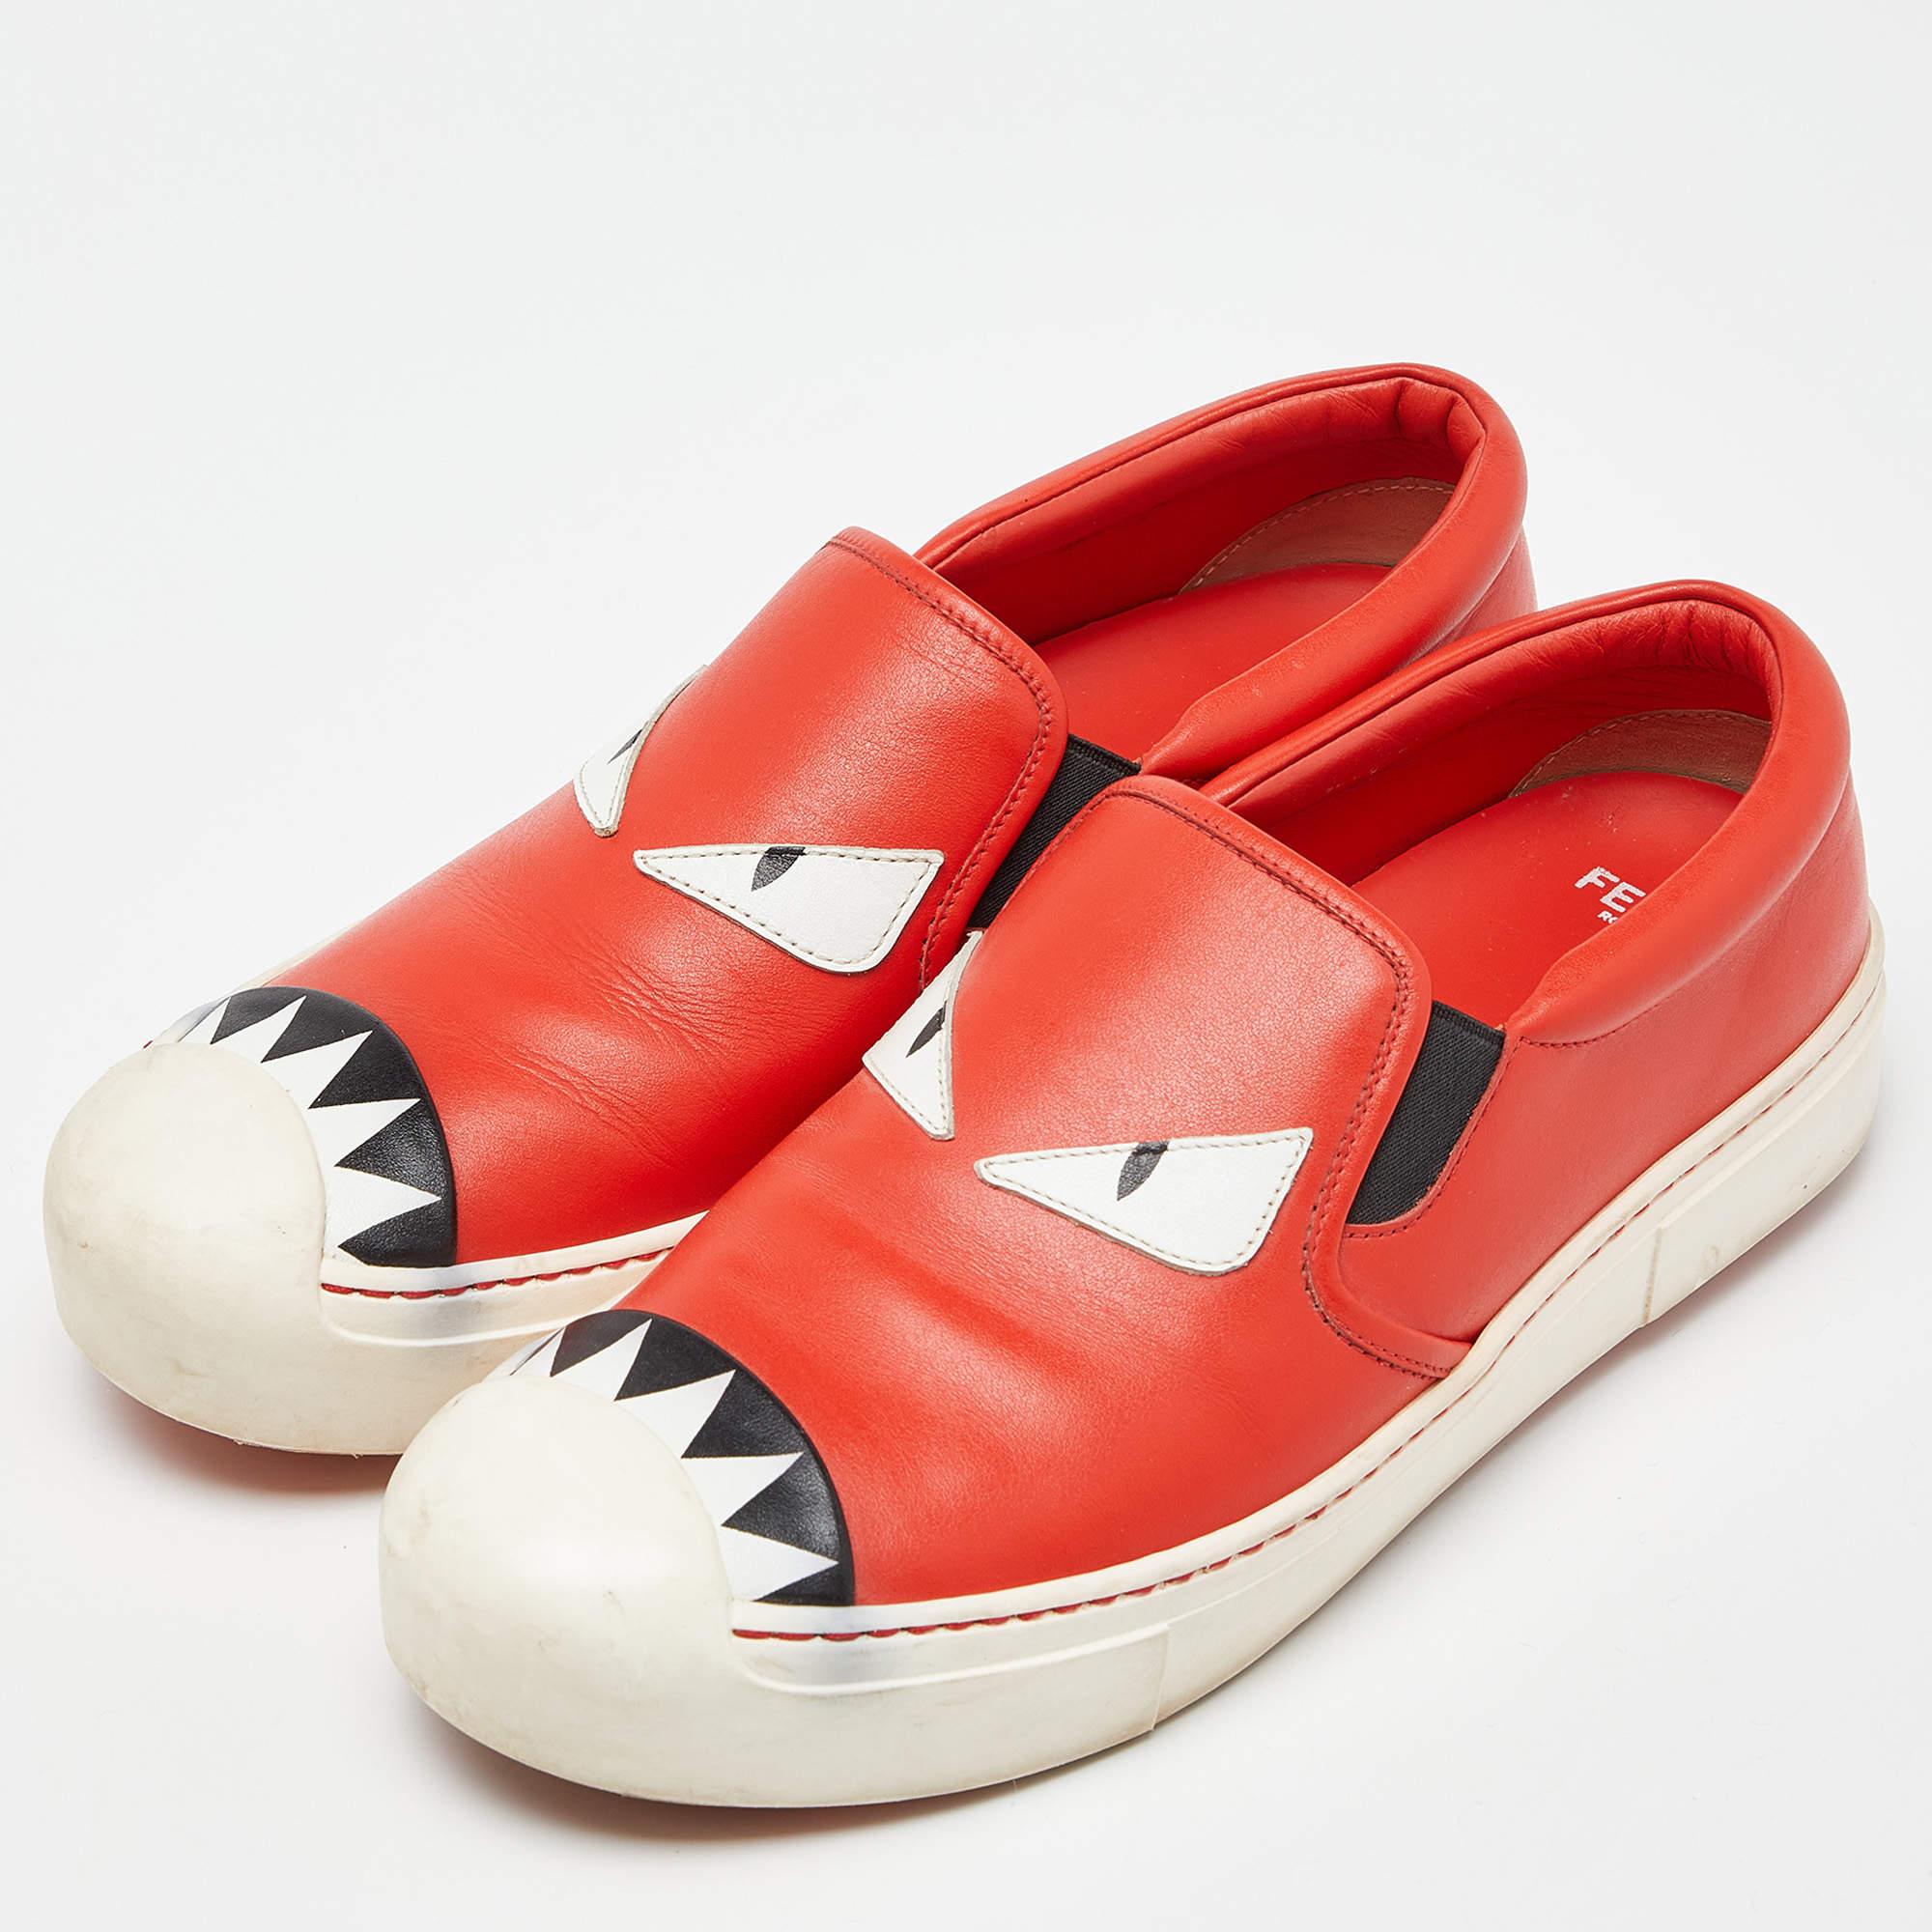 Comfort and high fashion are brought together in these fabulous Fendi Monster sneakers. They have been crafted from high-quality materials into a sturdy design. Add them to your closet and walk the streets in style!

Includes: Original Box